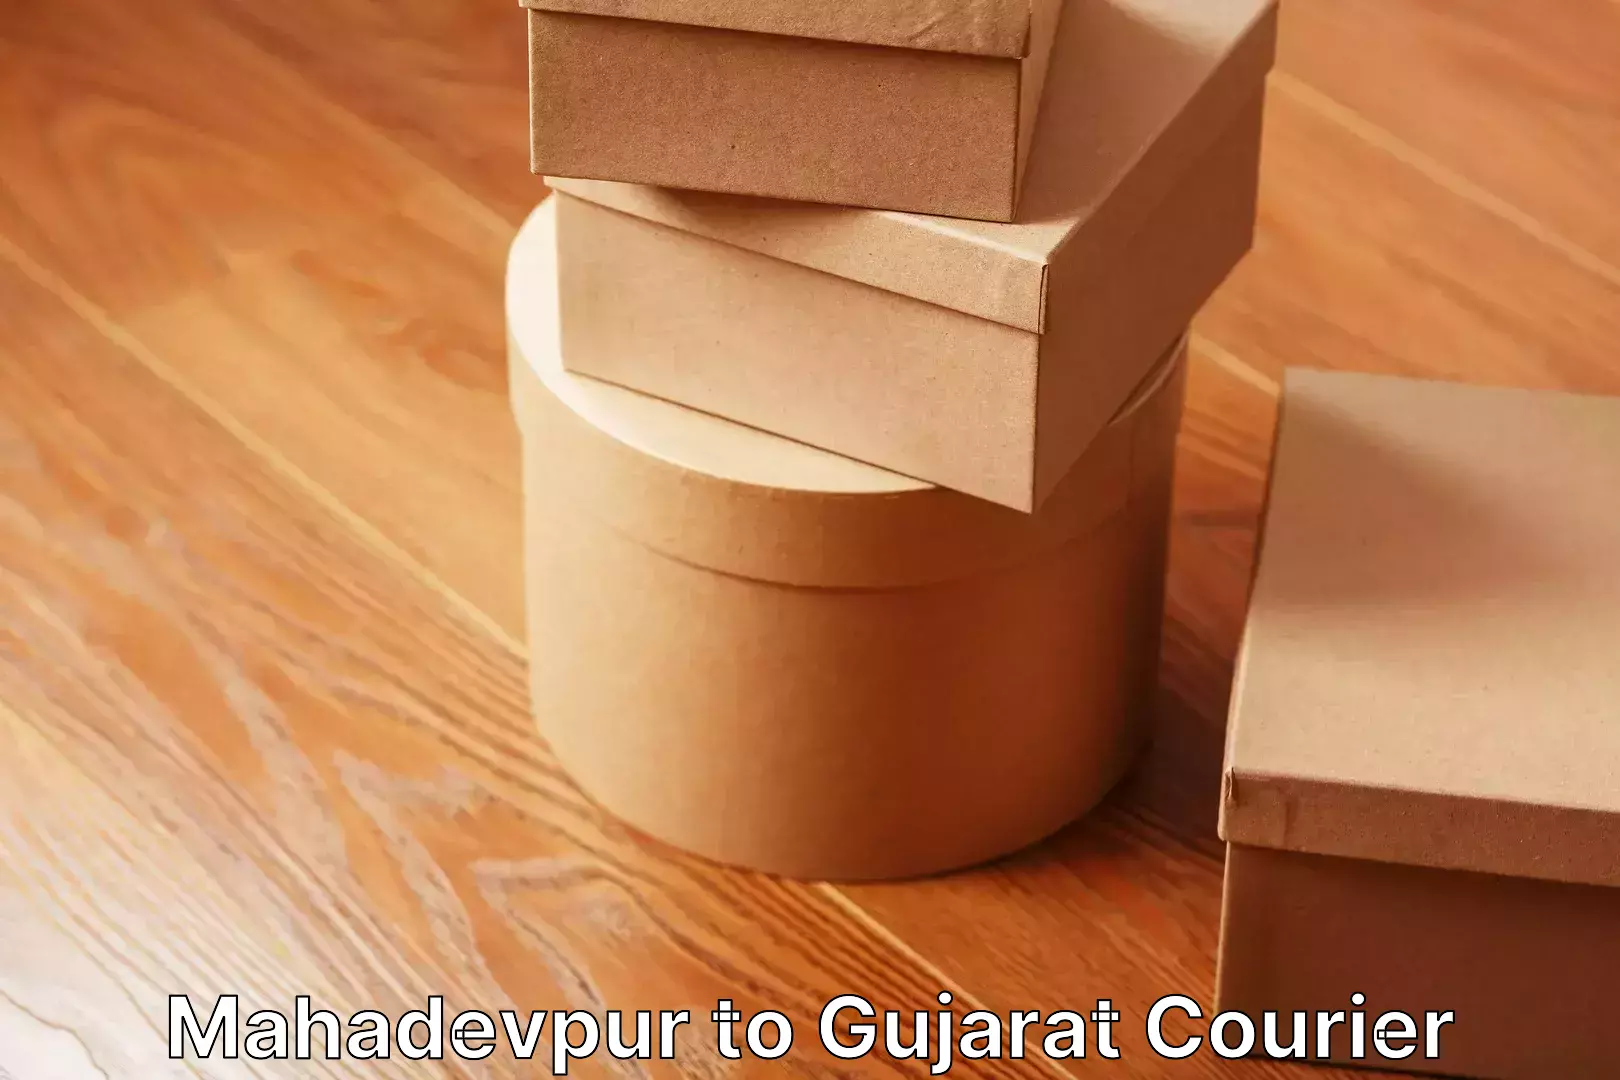 Efficient packing services in Mahadevpur to Gujarat